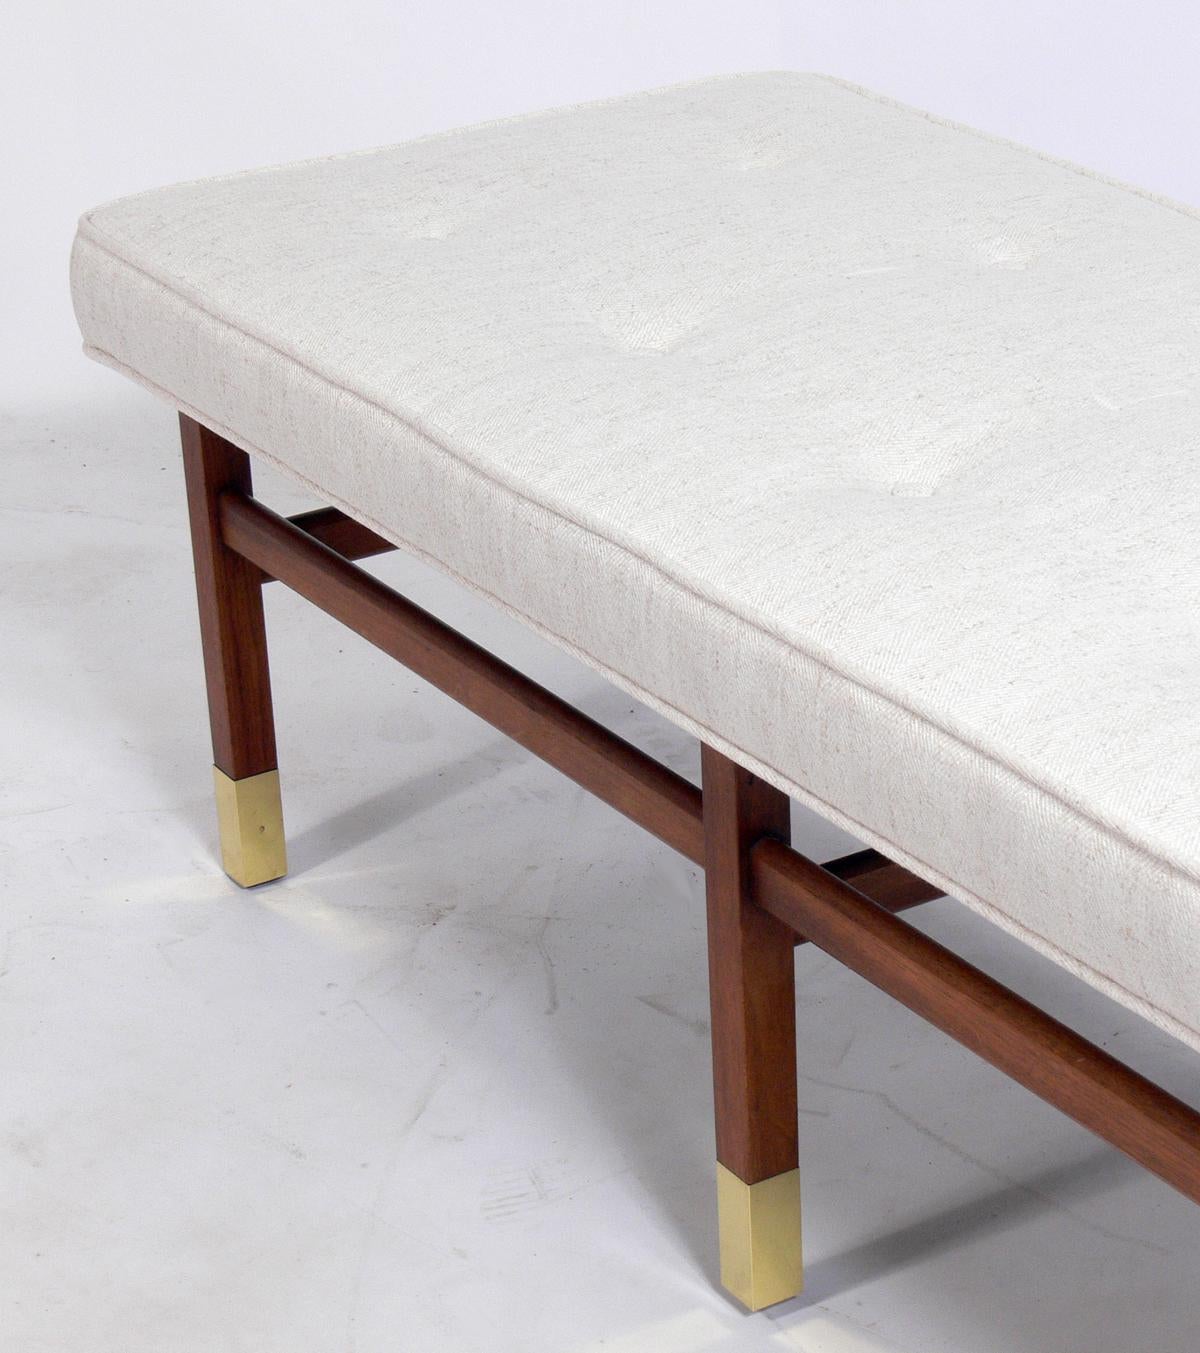 American Mid-Century Modern Bench Attributed to Harvey Probber